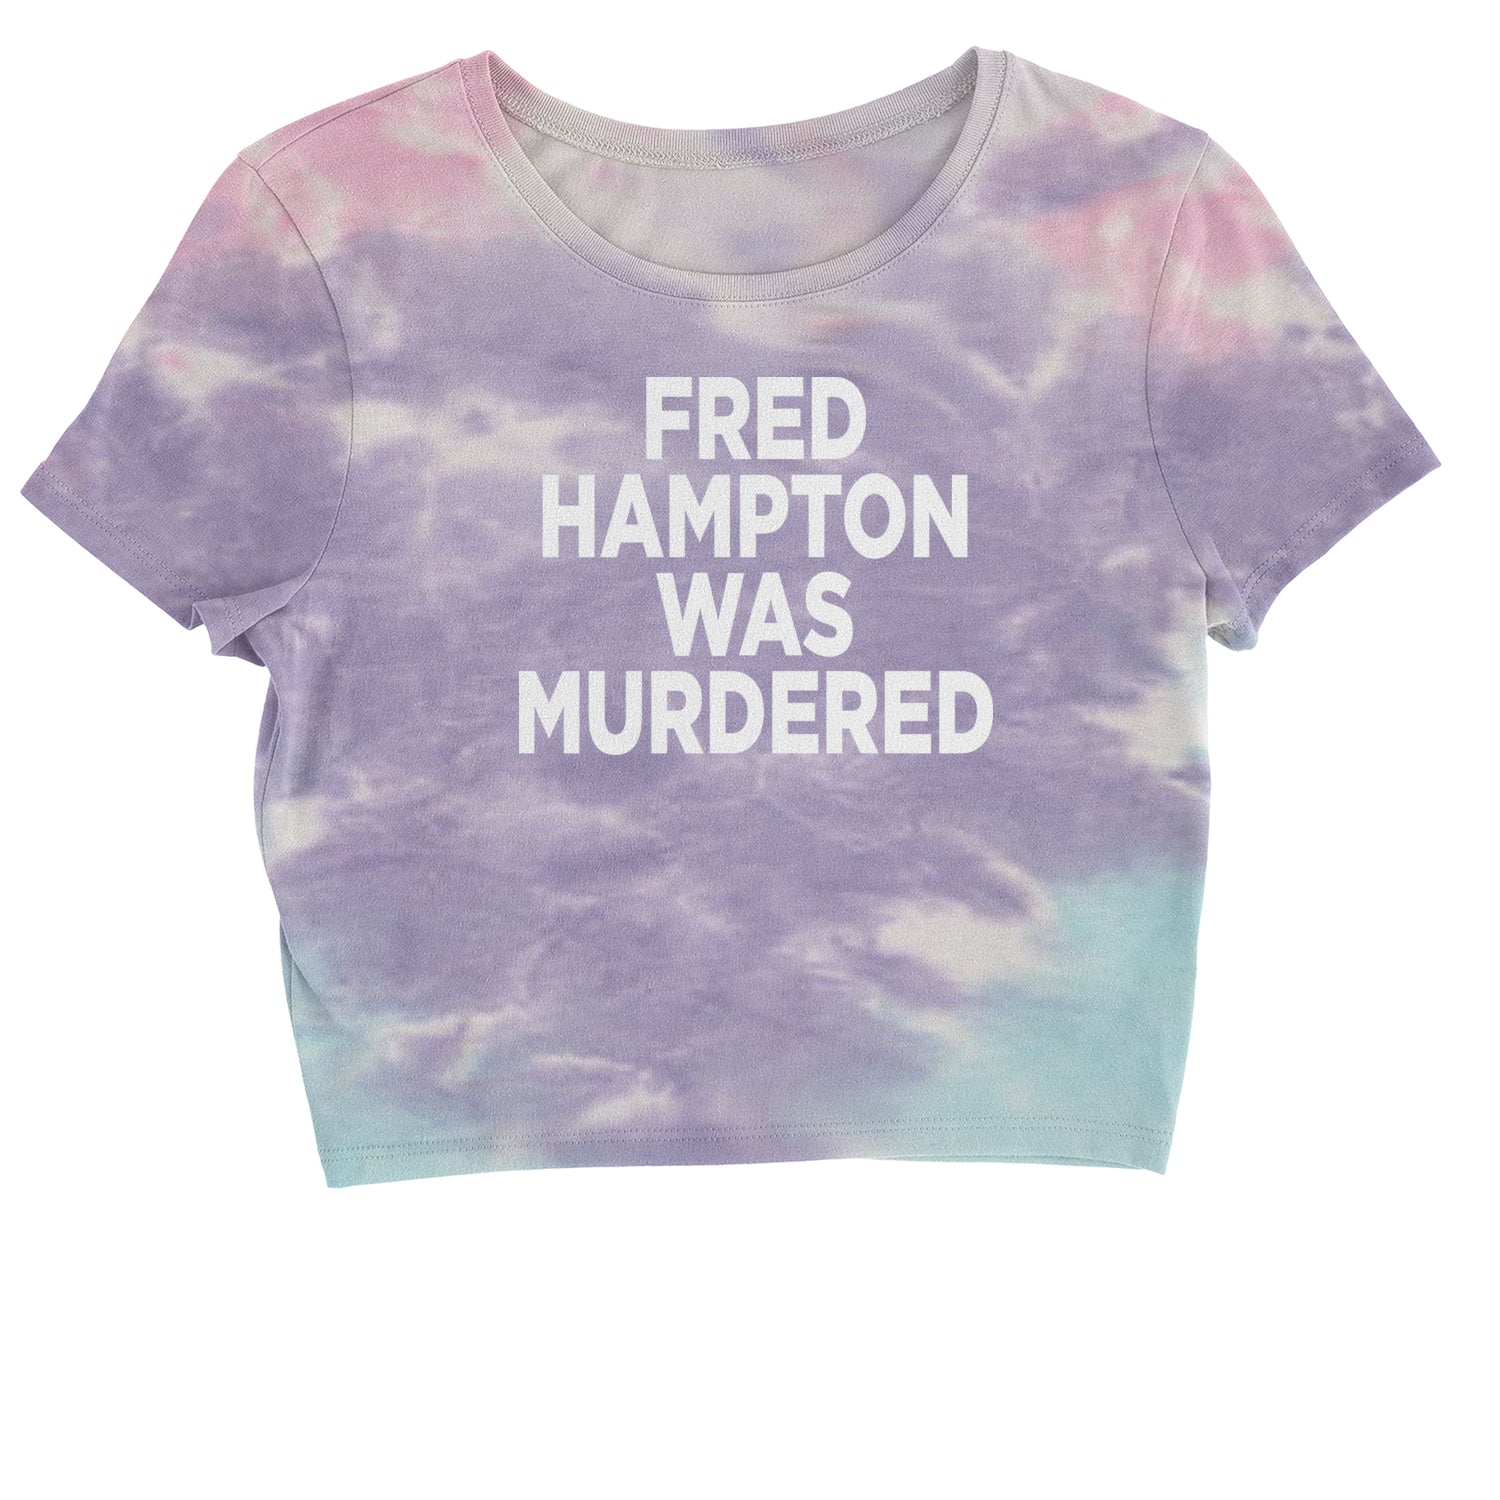 Fred Hampton Was Murdered Cropped T-Shirt activism, african, africanamerican, american, black, blm, brutality, eddie, lives, matter, murphy, people, police, you by Expression Tees